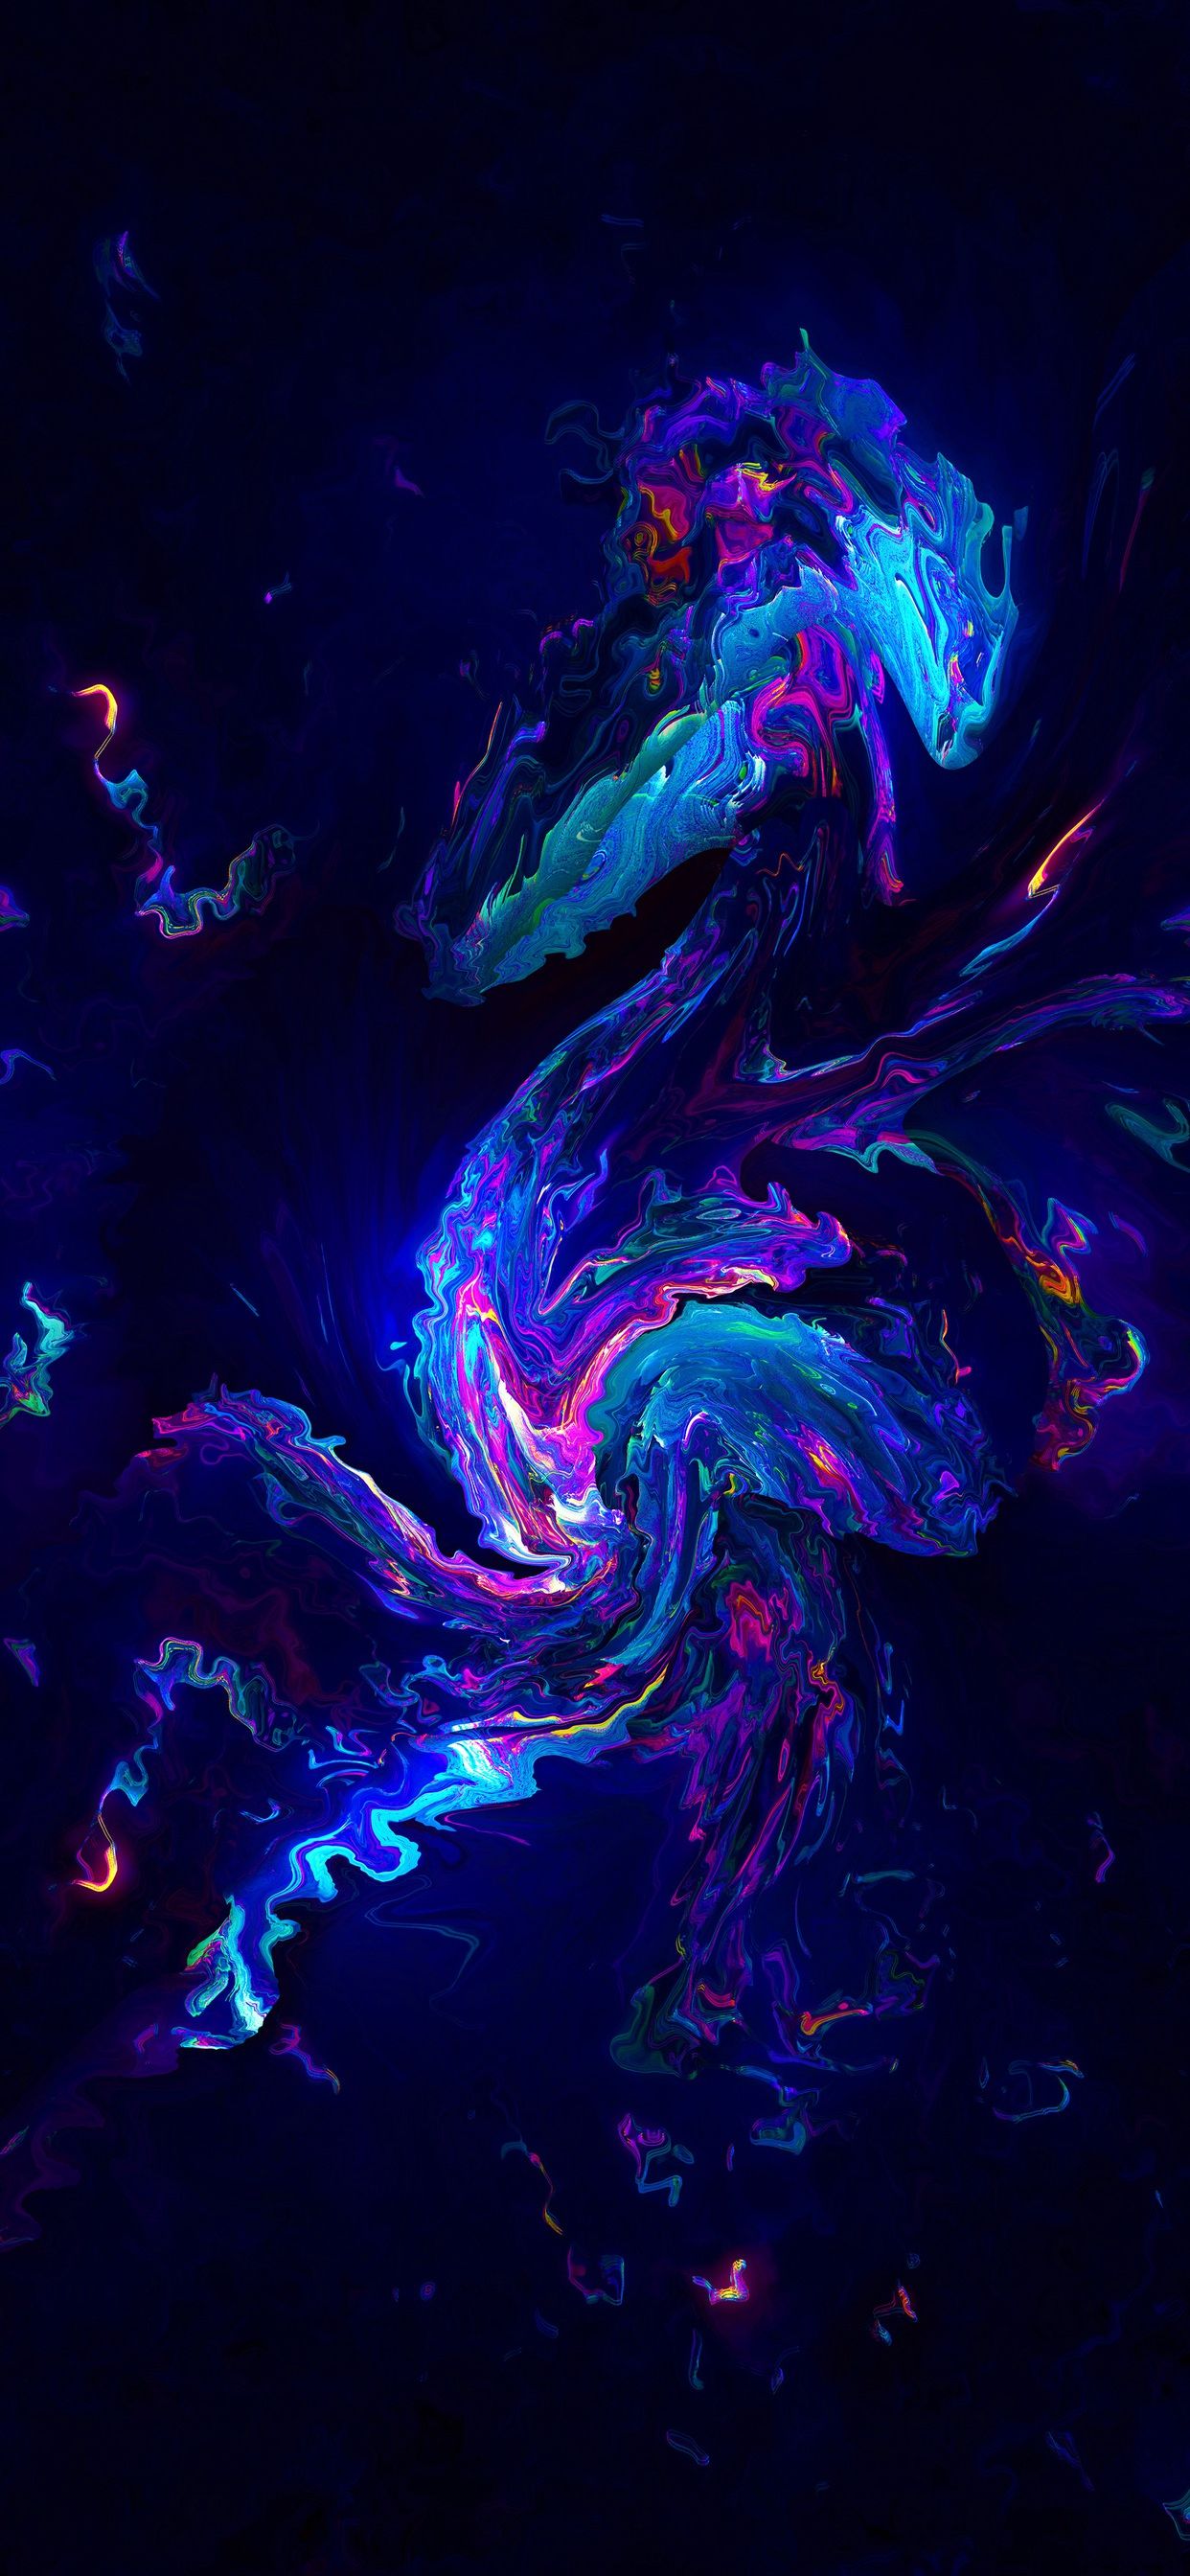 4k Abstract Mobile iPhone Wallpapers - Wallpaper Cave